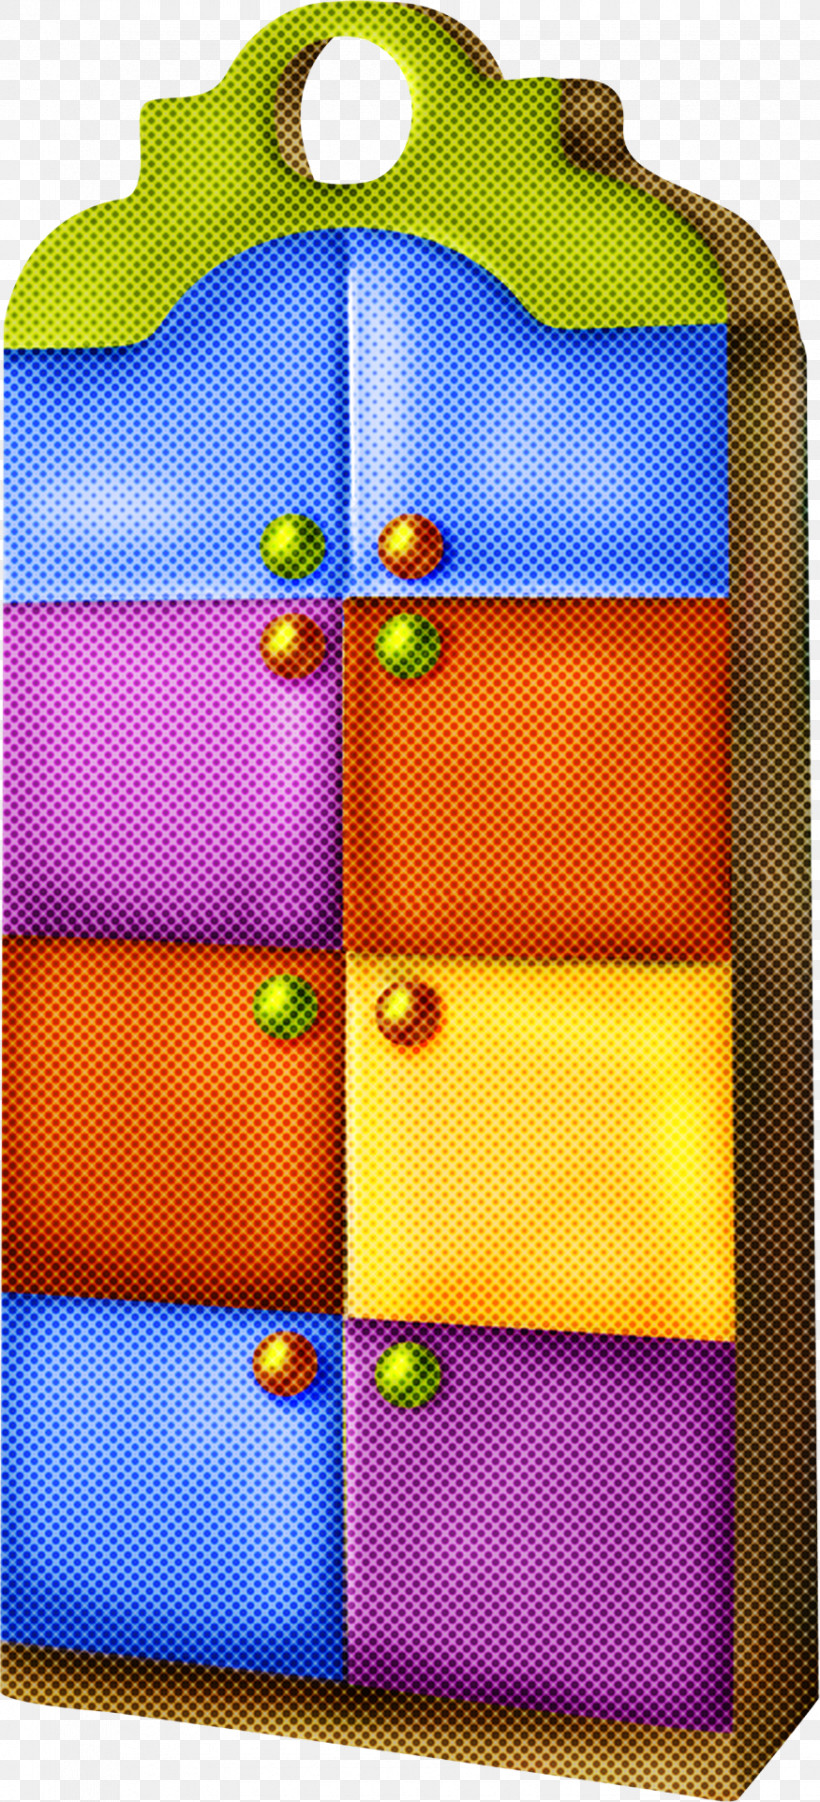 Colorfulness Games Rectangle Square, PNG, 875x1923px, Colorfulness, Games, Rectangle, Square Download Free